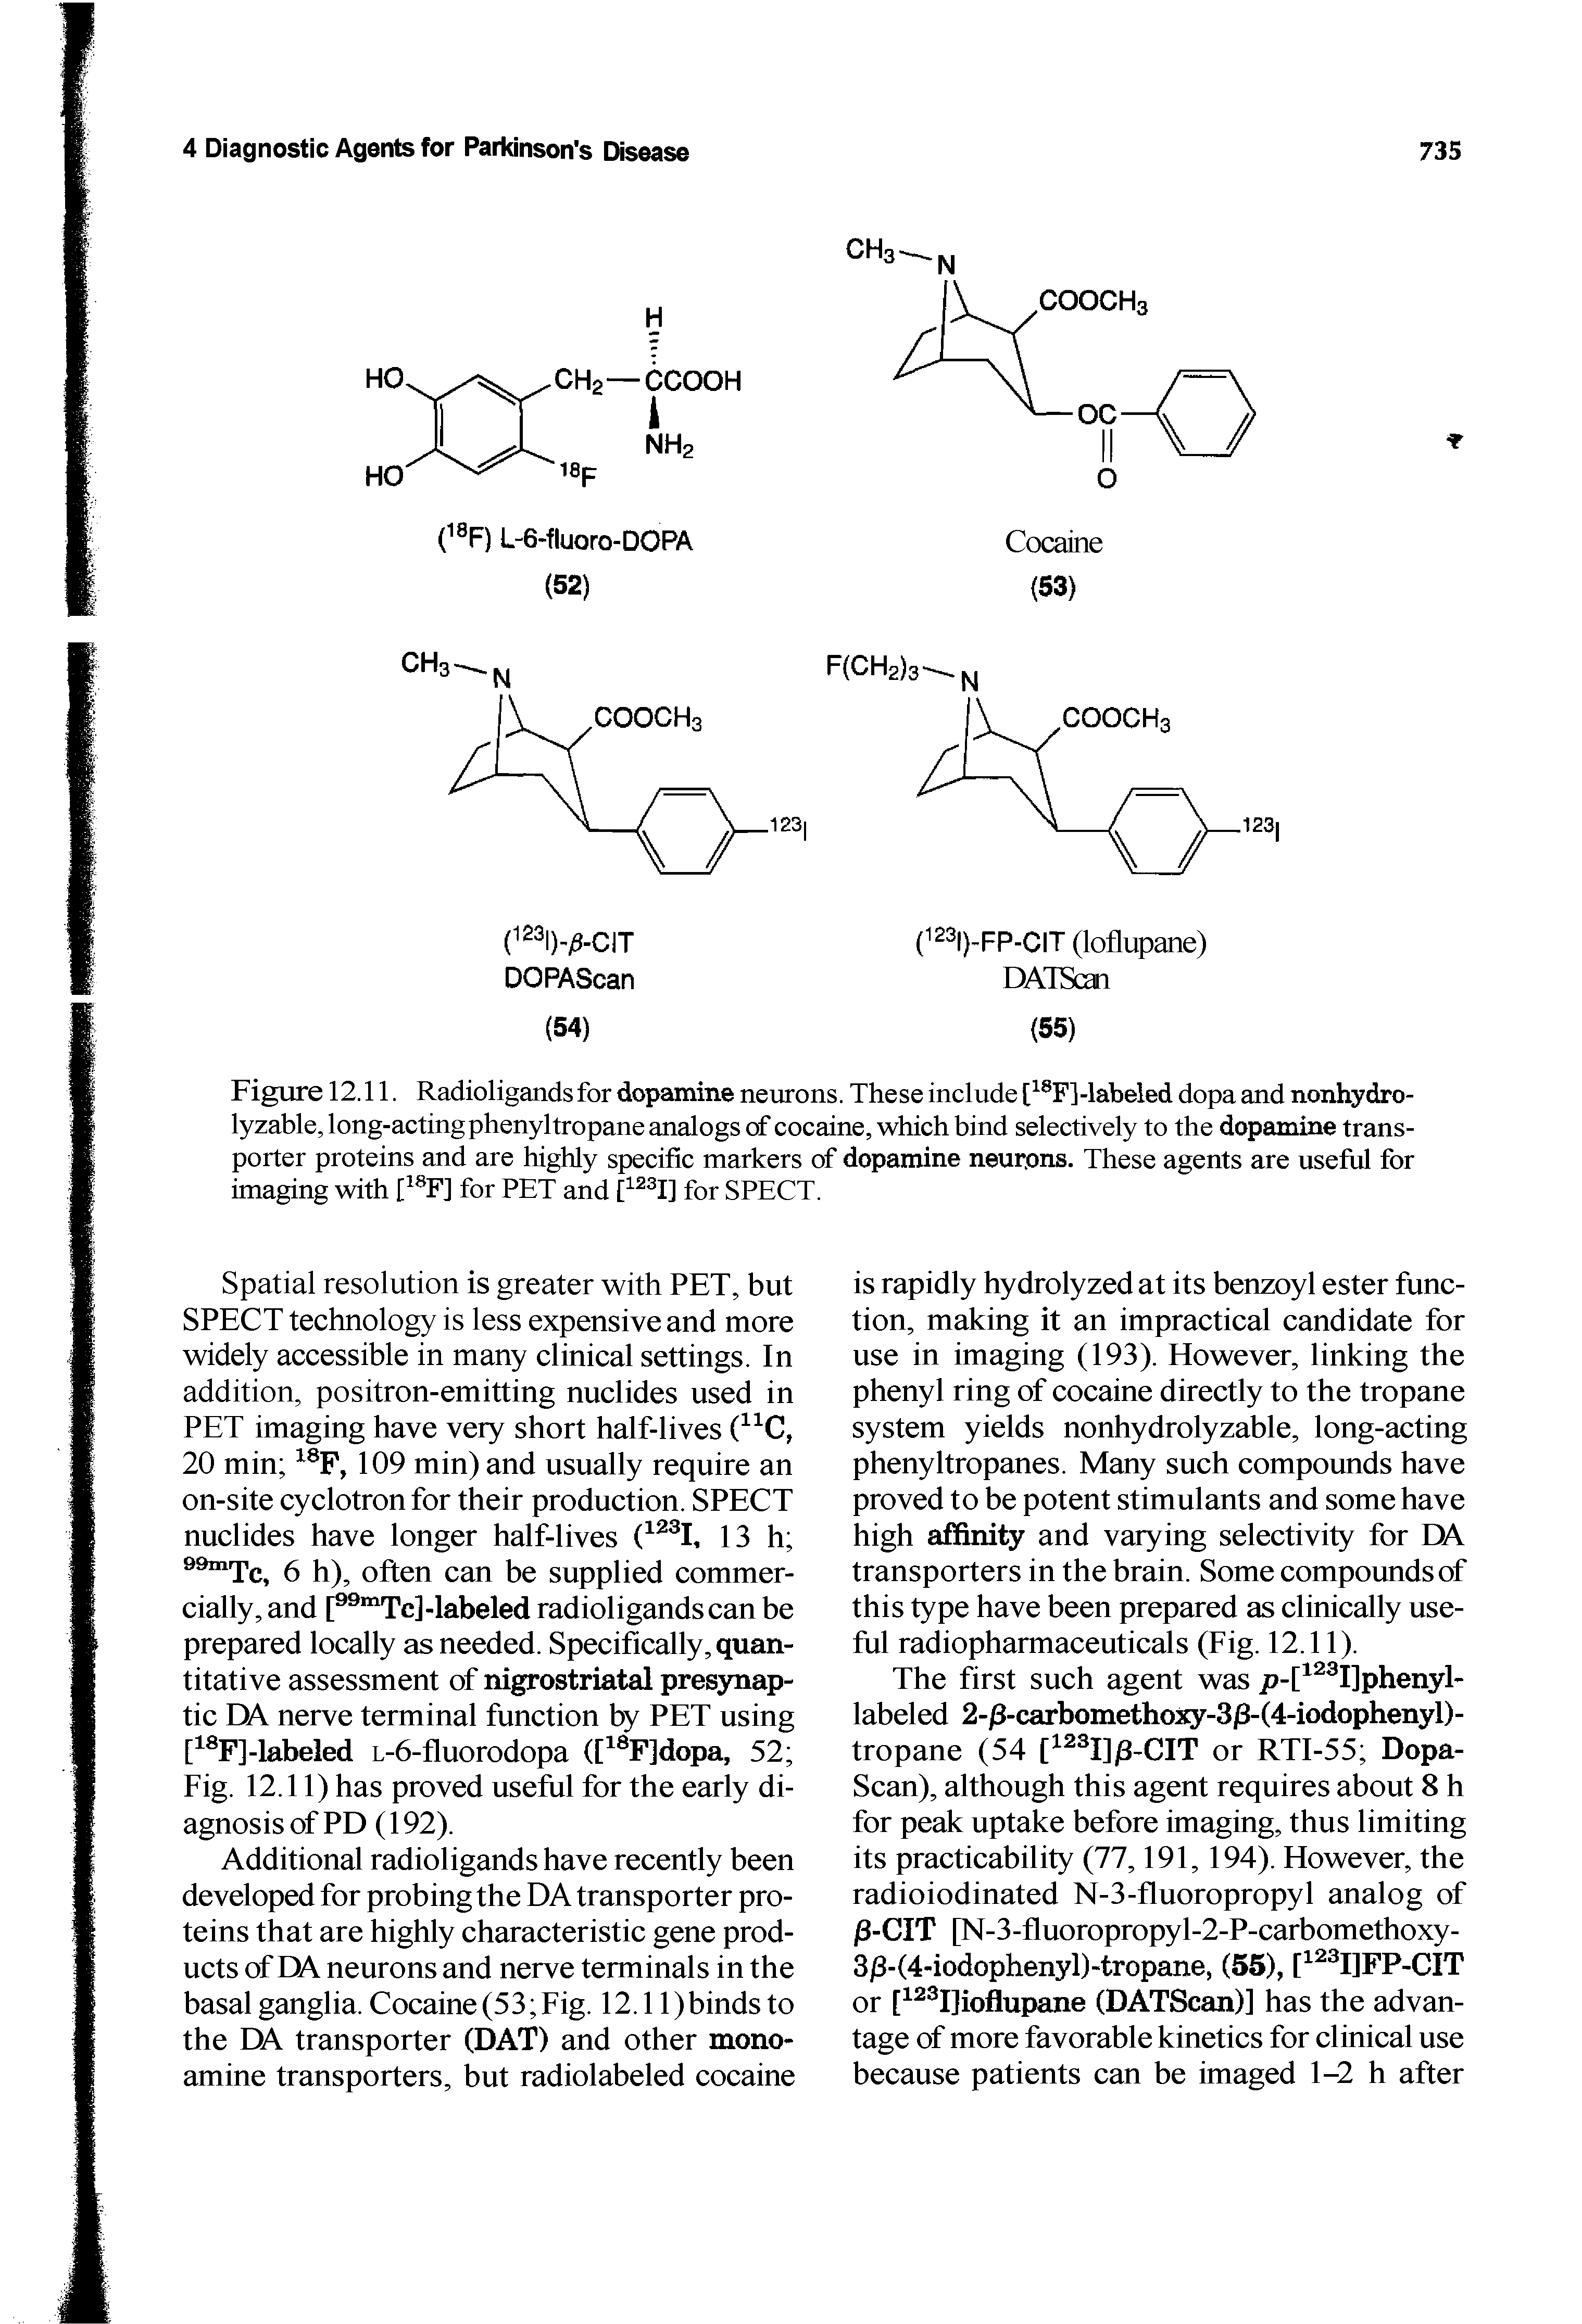 Figure 12.11. Radioligands for dopamine neurons. The se include [ F] -labeled dopa and nonhydro-lyzable, long-acting phenyltropane analogs of cocaine, which bind selectively to the dopamine transporter proteins and are highly specific markers of dopamine neurpns. These agents are useful for imaging with C F] for PET and for SPECT.